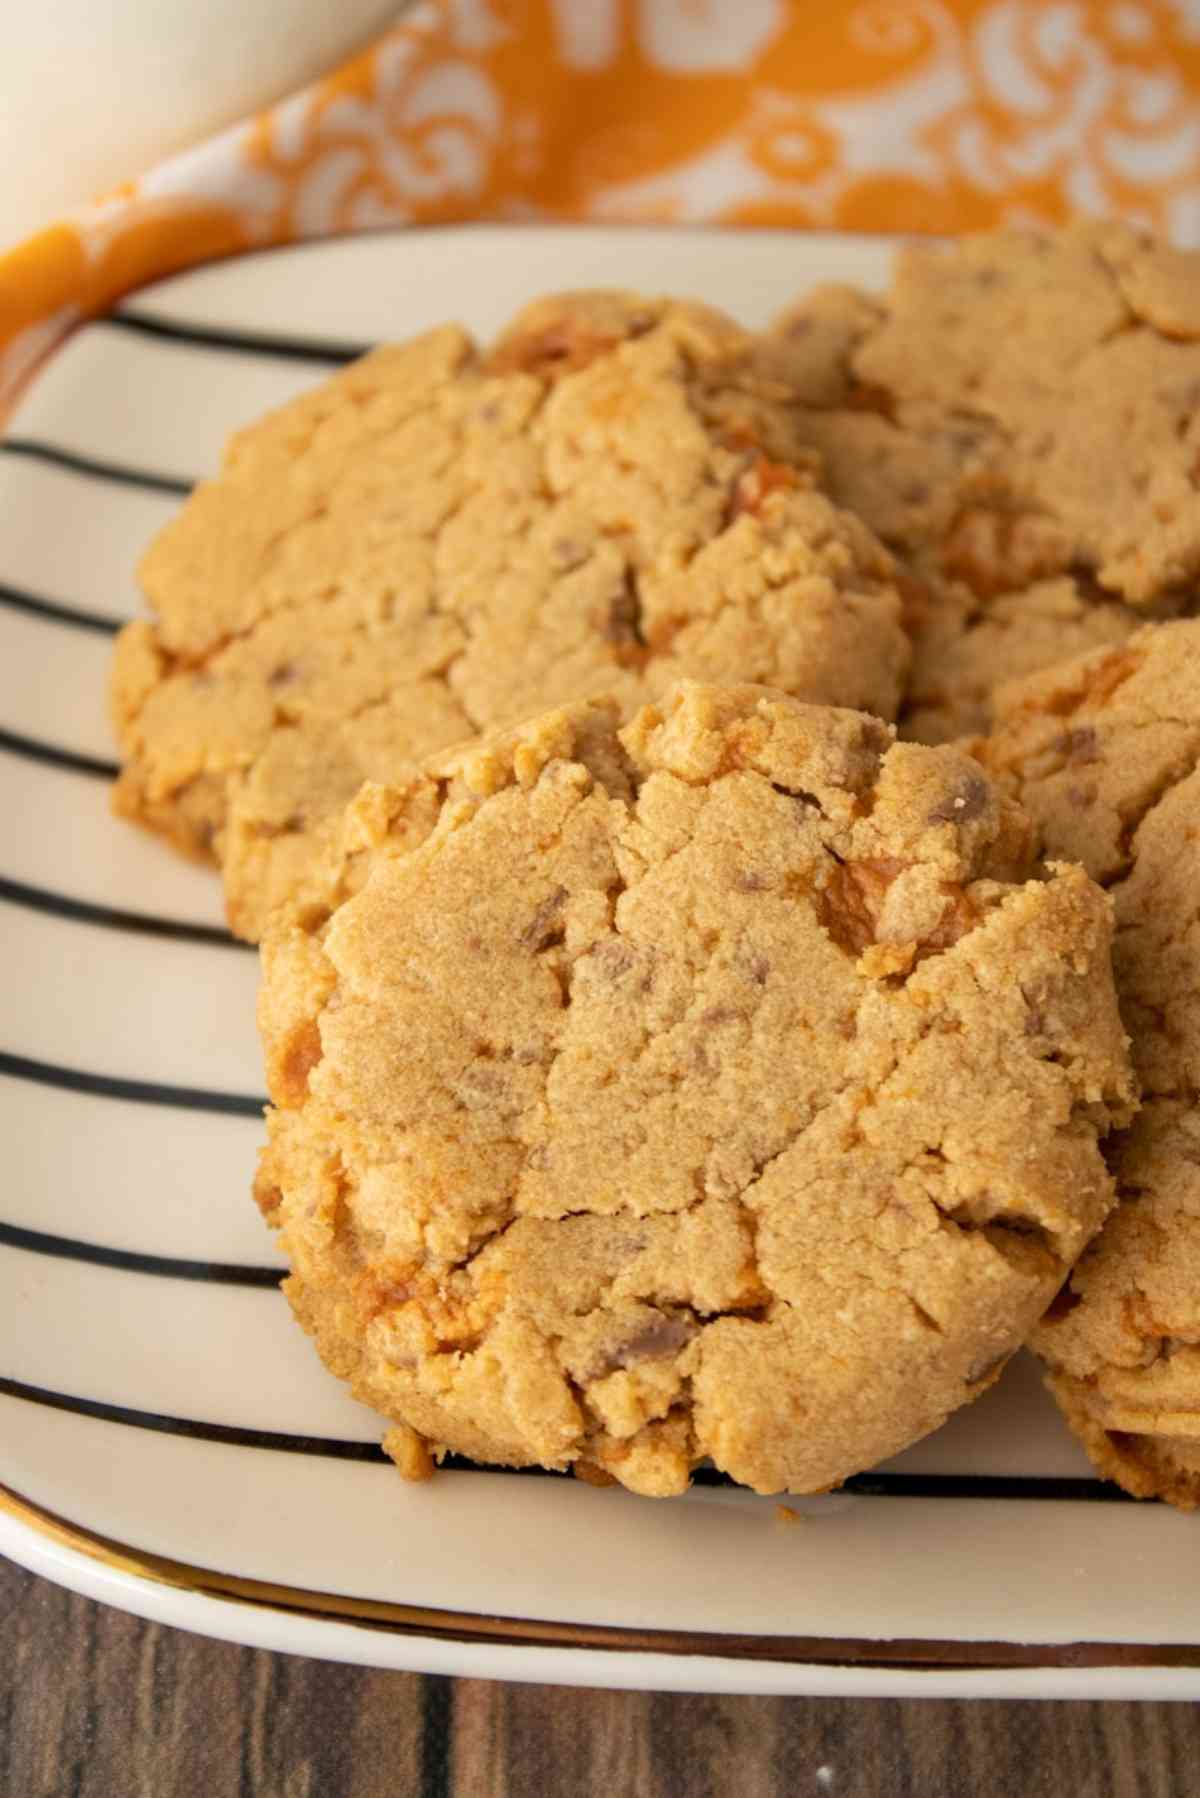 Butterfinger cookies on a striped plate.